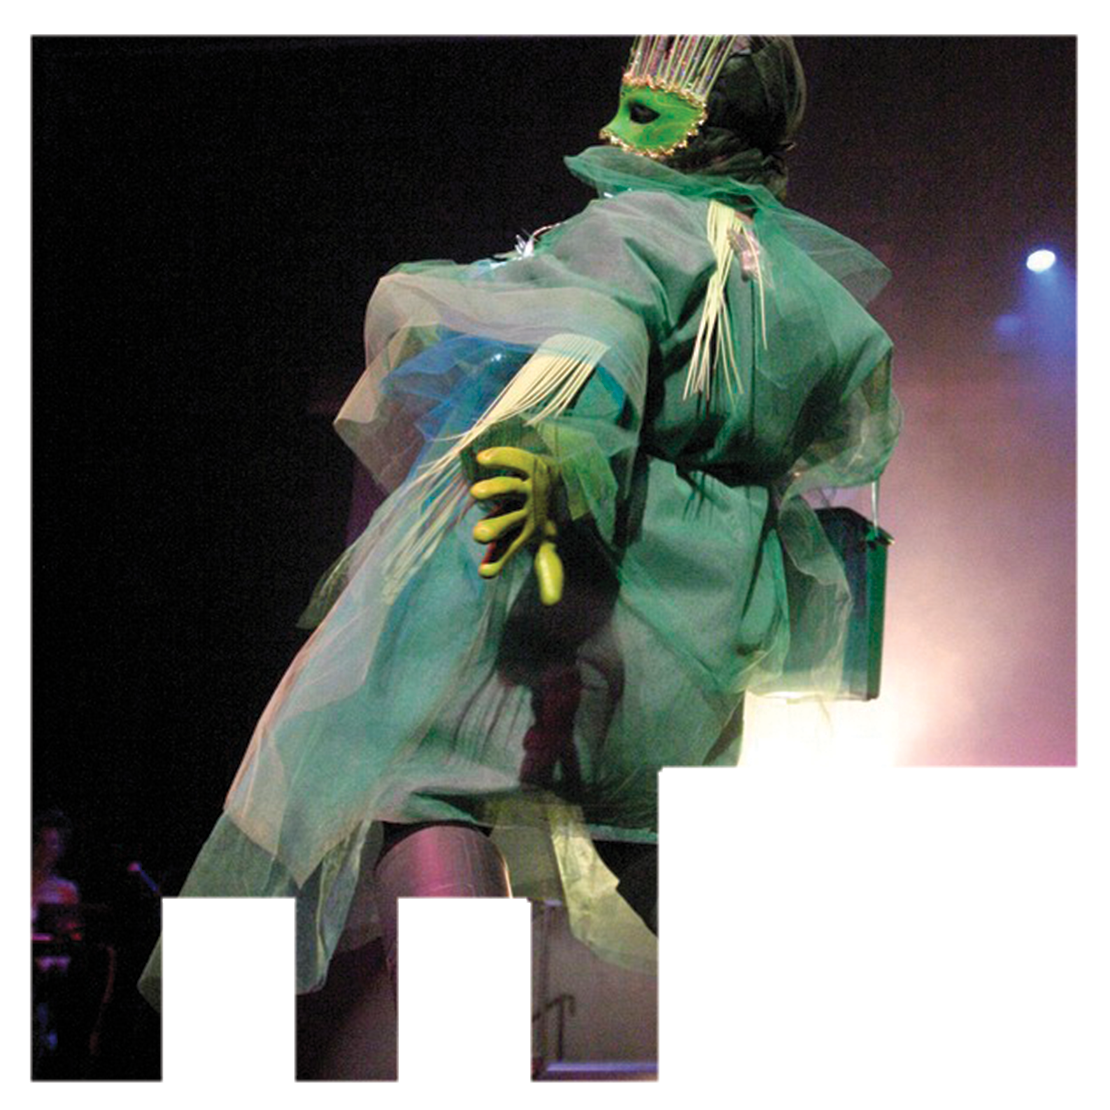 The 2015 Wearable Art Show Featuring the Runway Challenge A model at the Wearable Artshow in a ruffled green sheer robe with matching mask and gloves. in the photo.